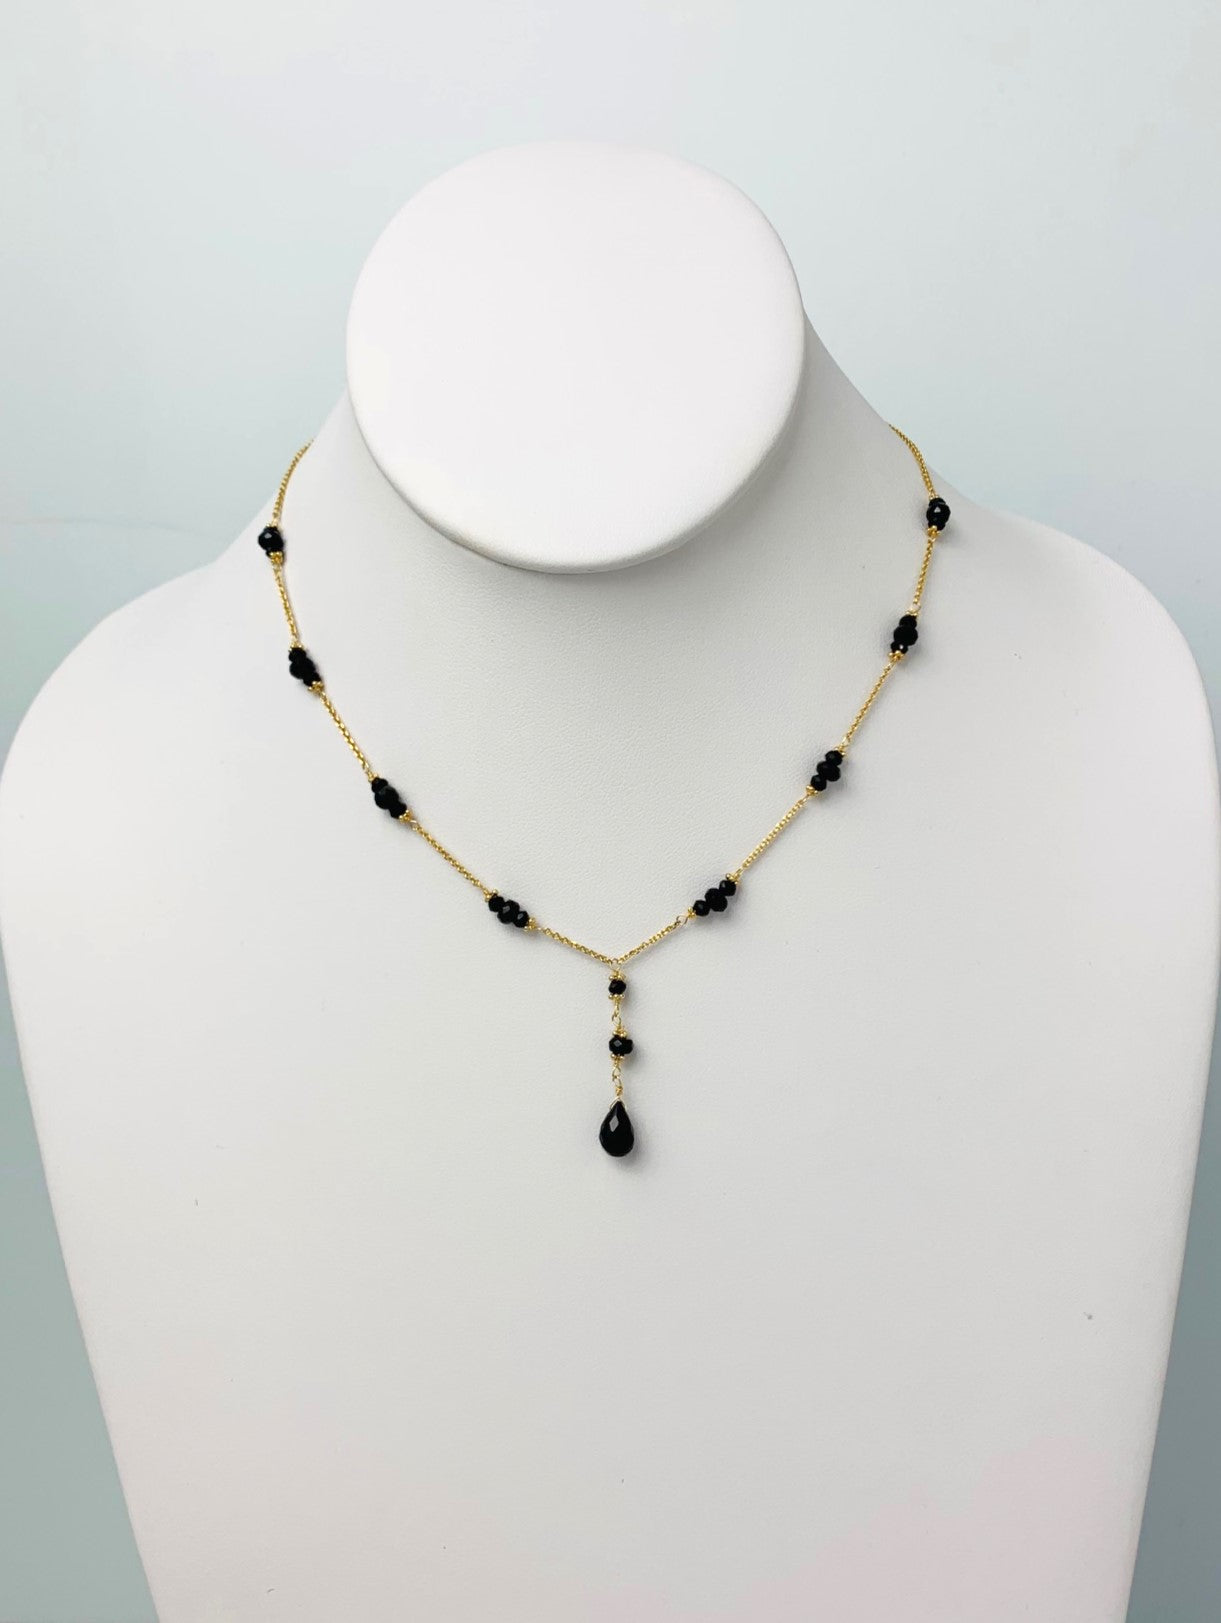 16"-17" Onyx Station Necklace With Center Drop in 14KY - NCK-463-DRPGM14Y-OX-17